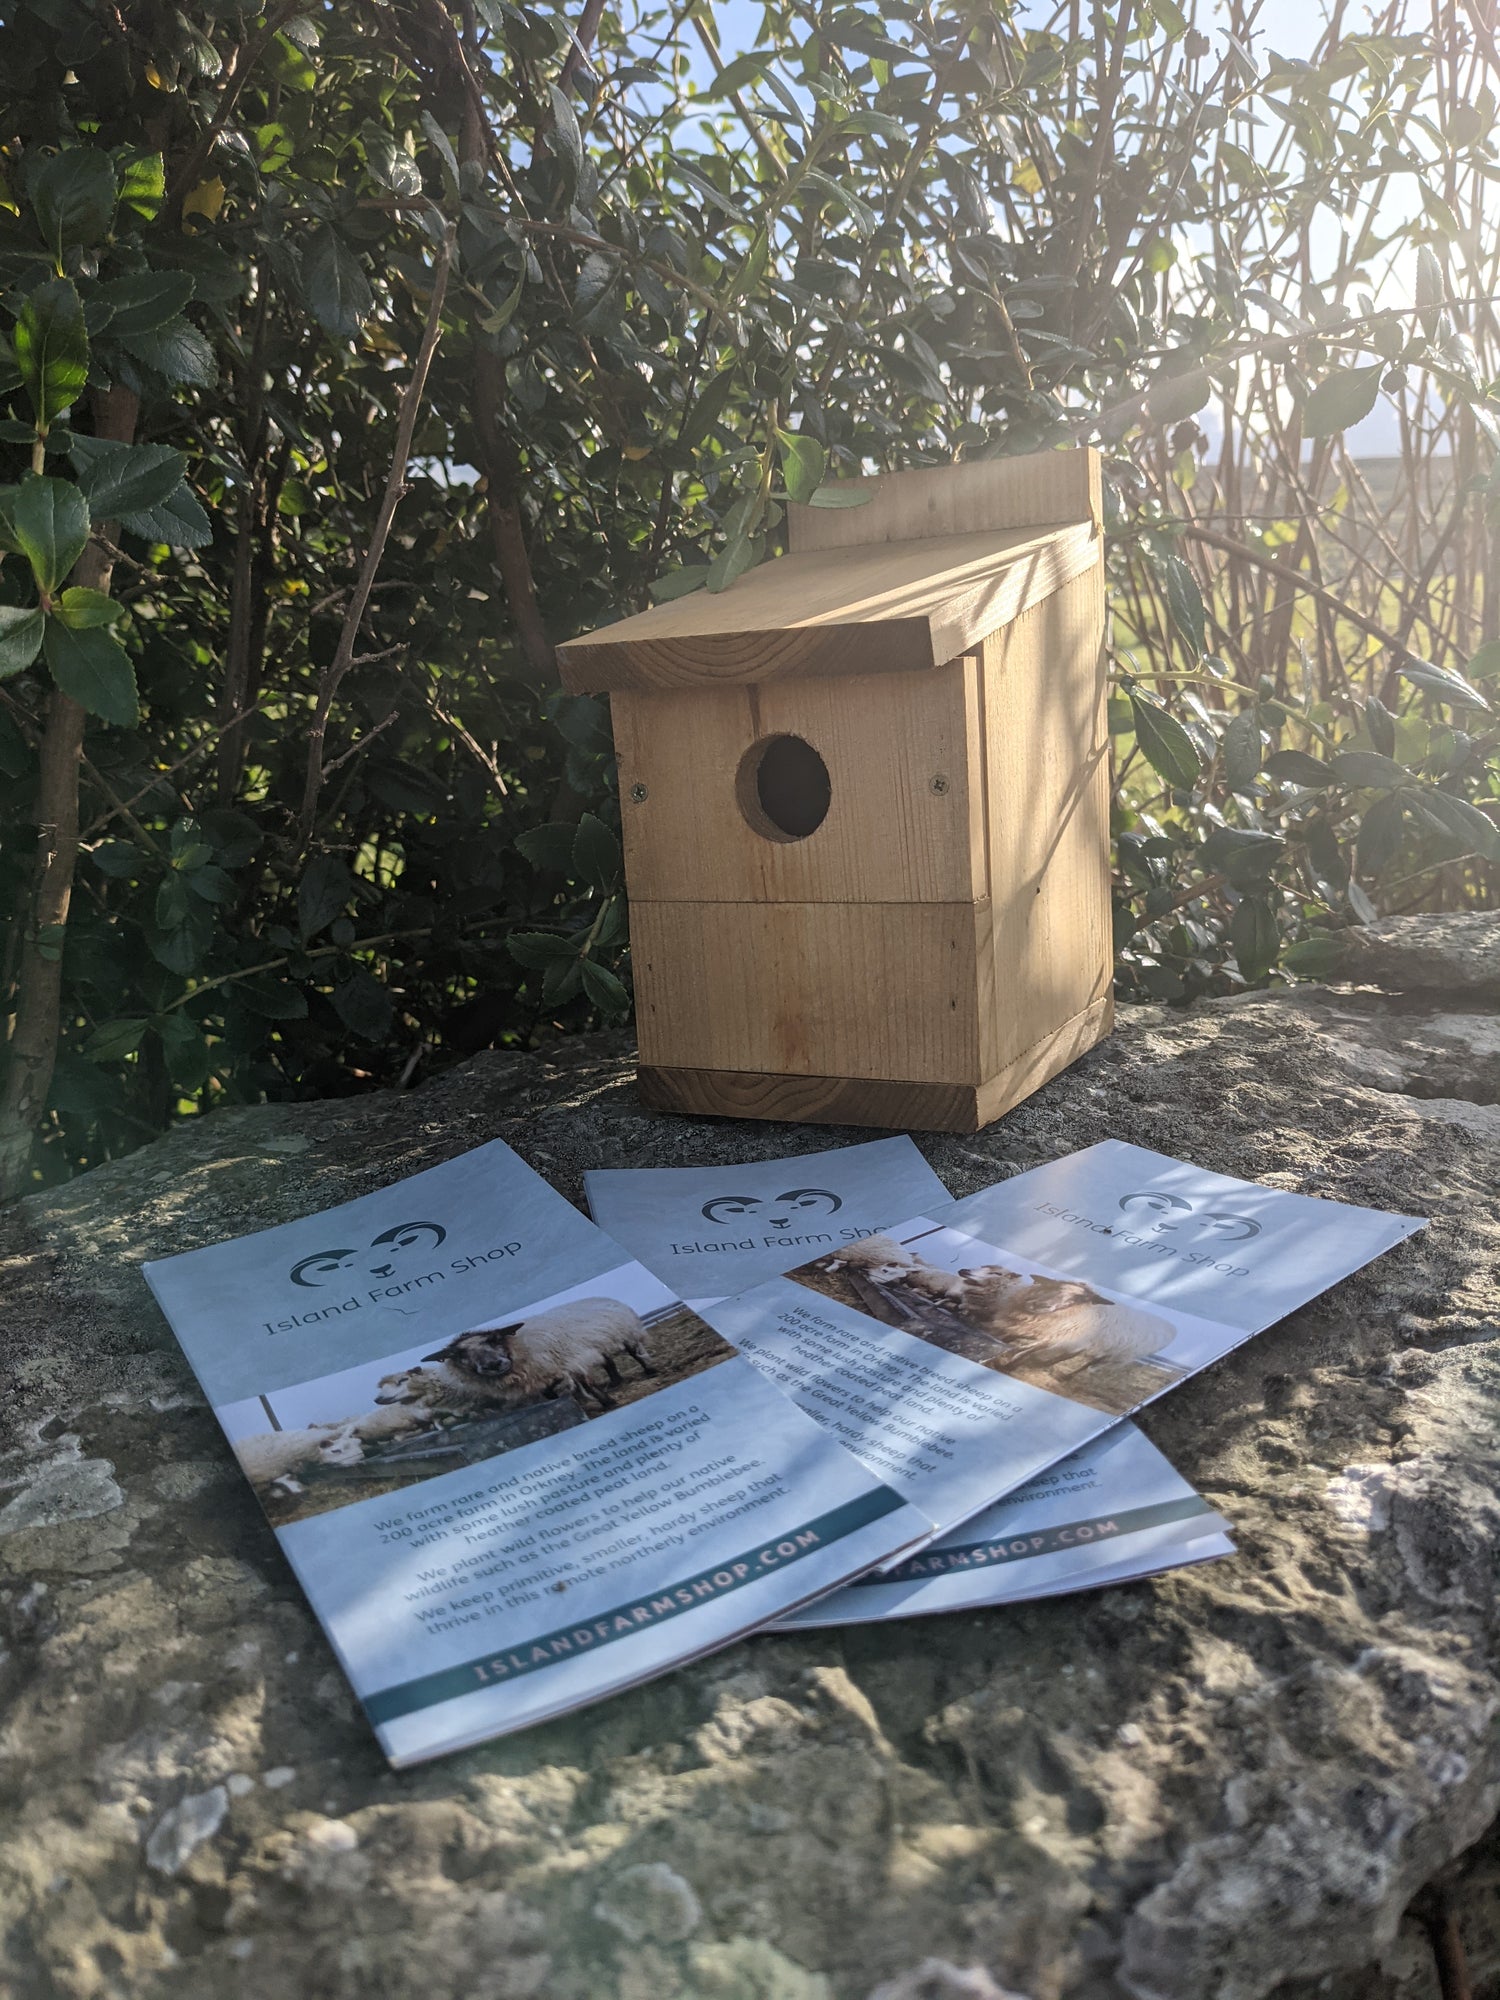 Johnston and Jeff Multinester Bird Box, suitable for many small garden birds. This image shows the removable panel on the box